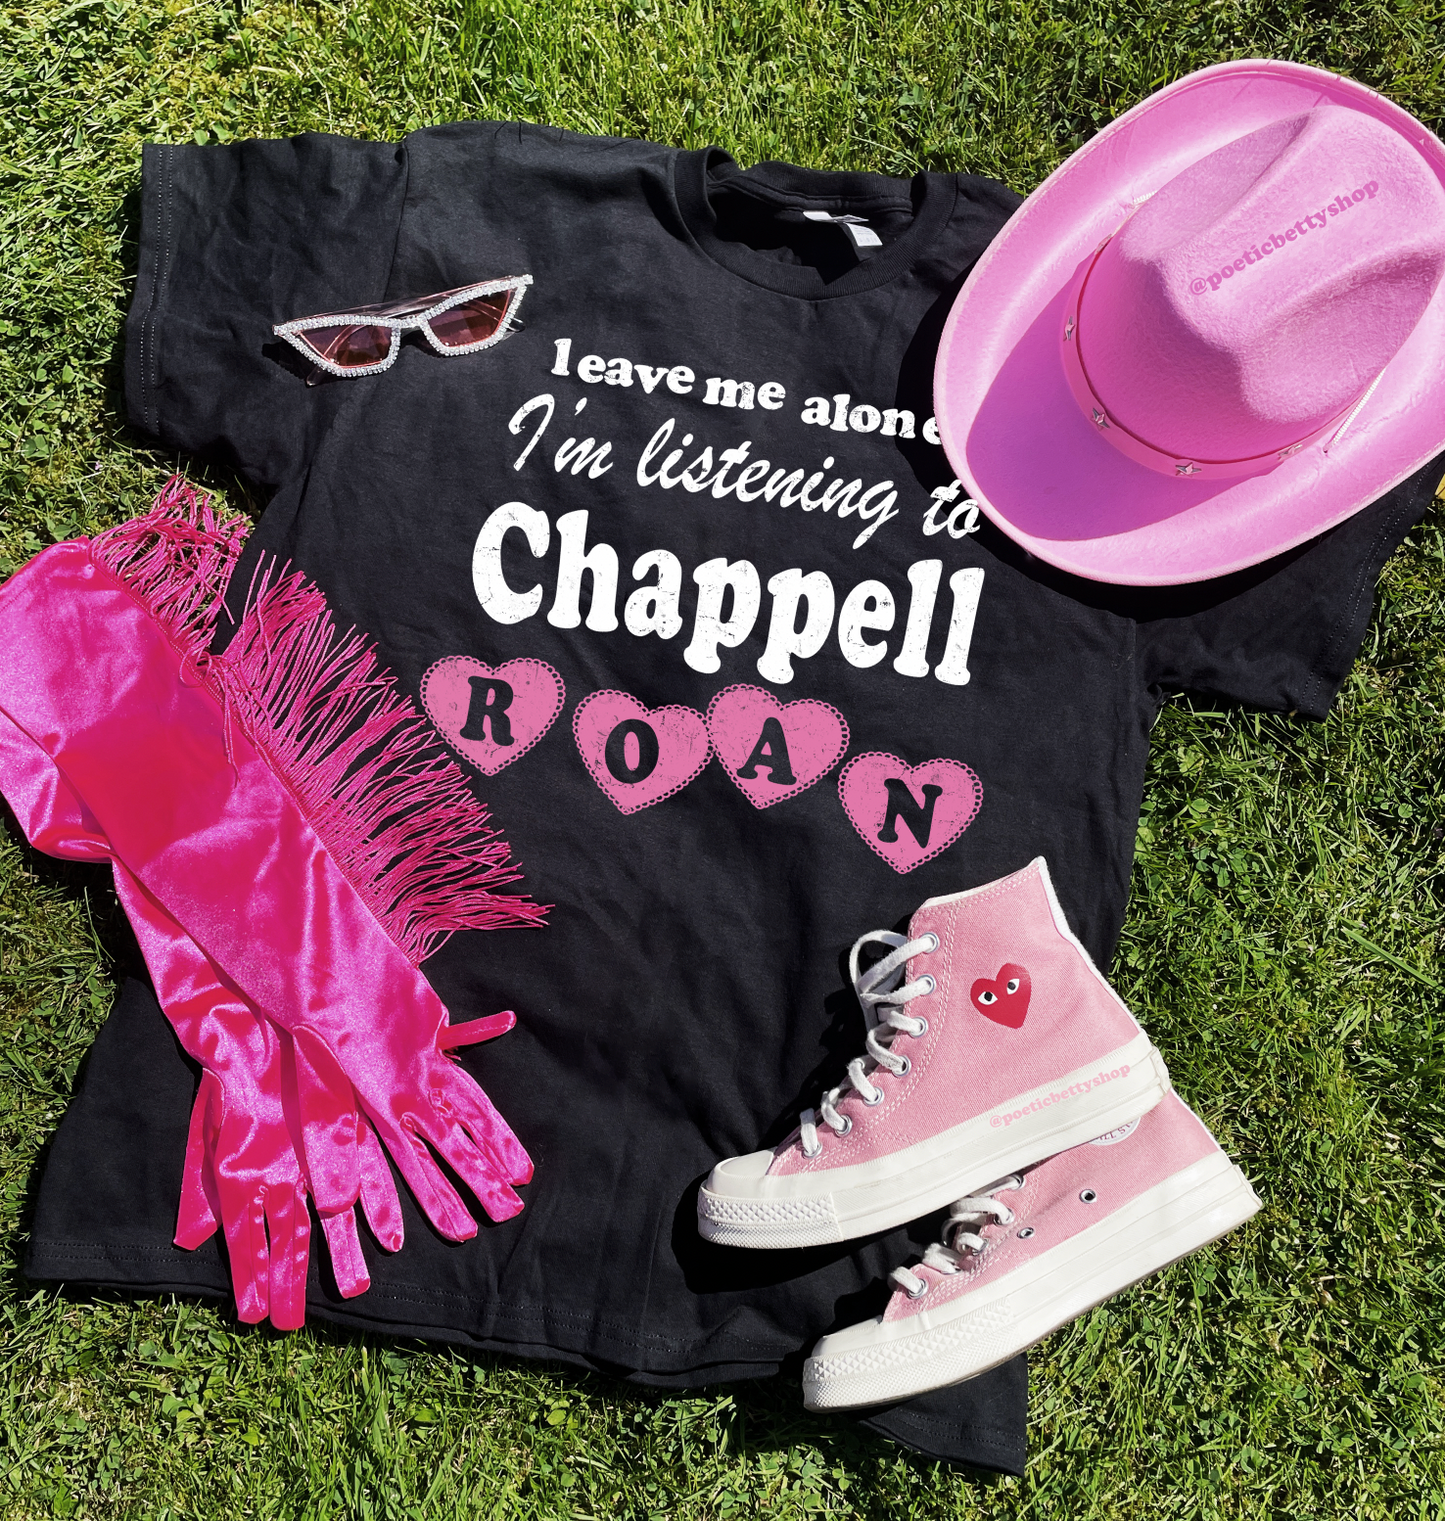 Leave Me Alone, I'm Listening to Chappell Roan Pink Pony Club Hearts Inspired Unisex T-Shirt